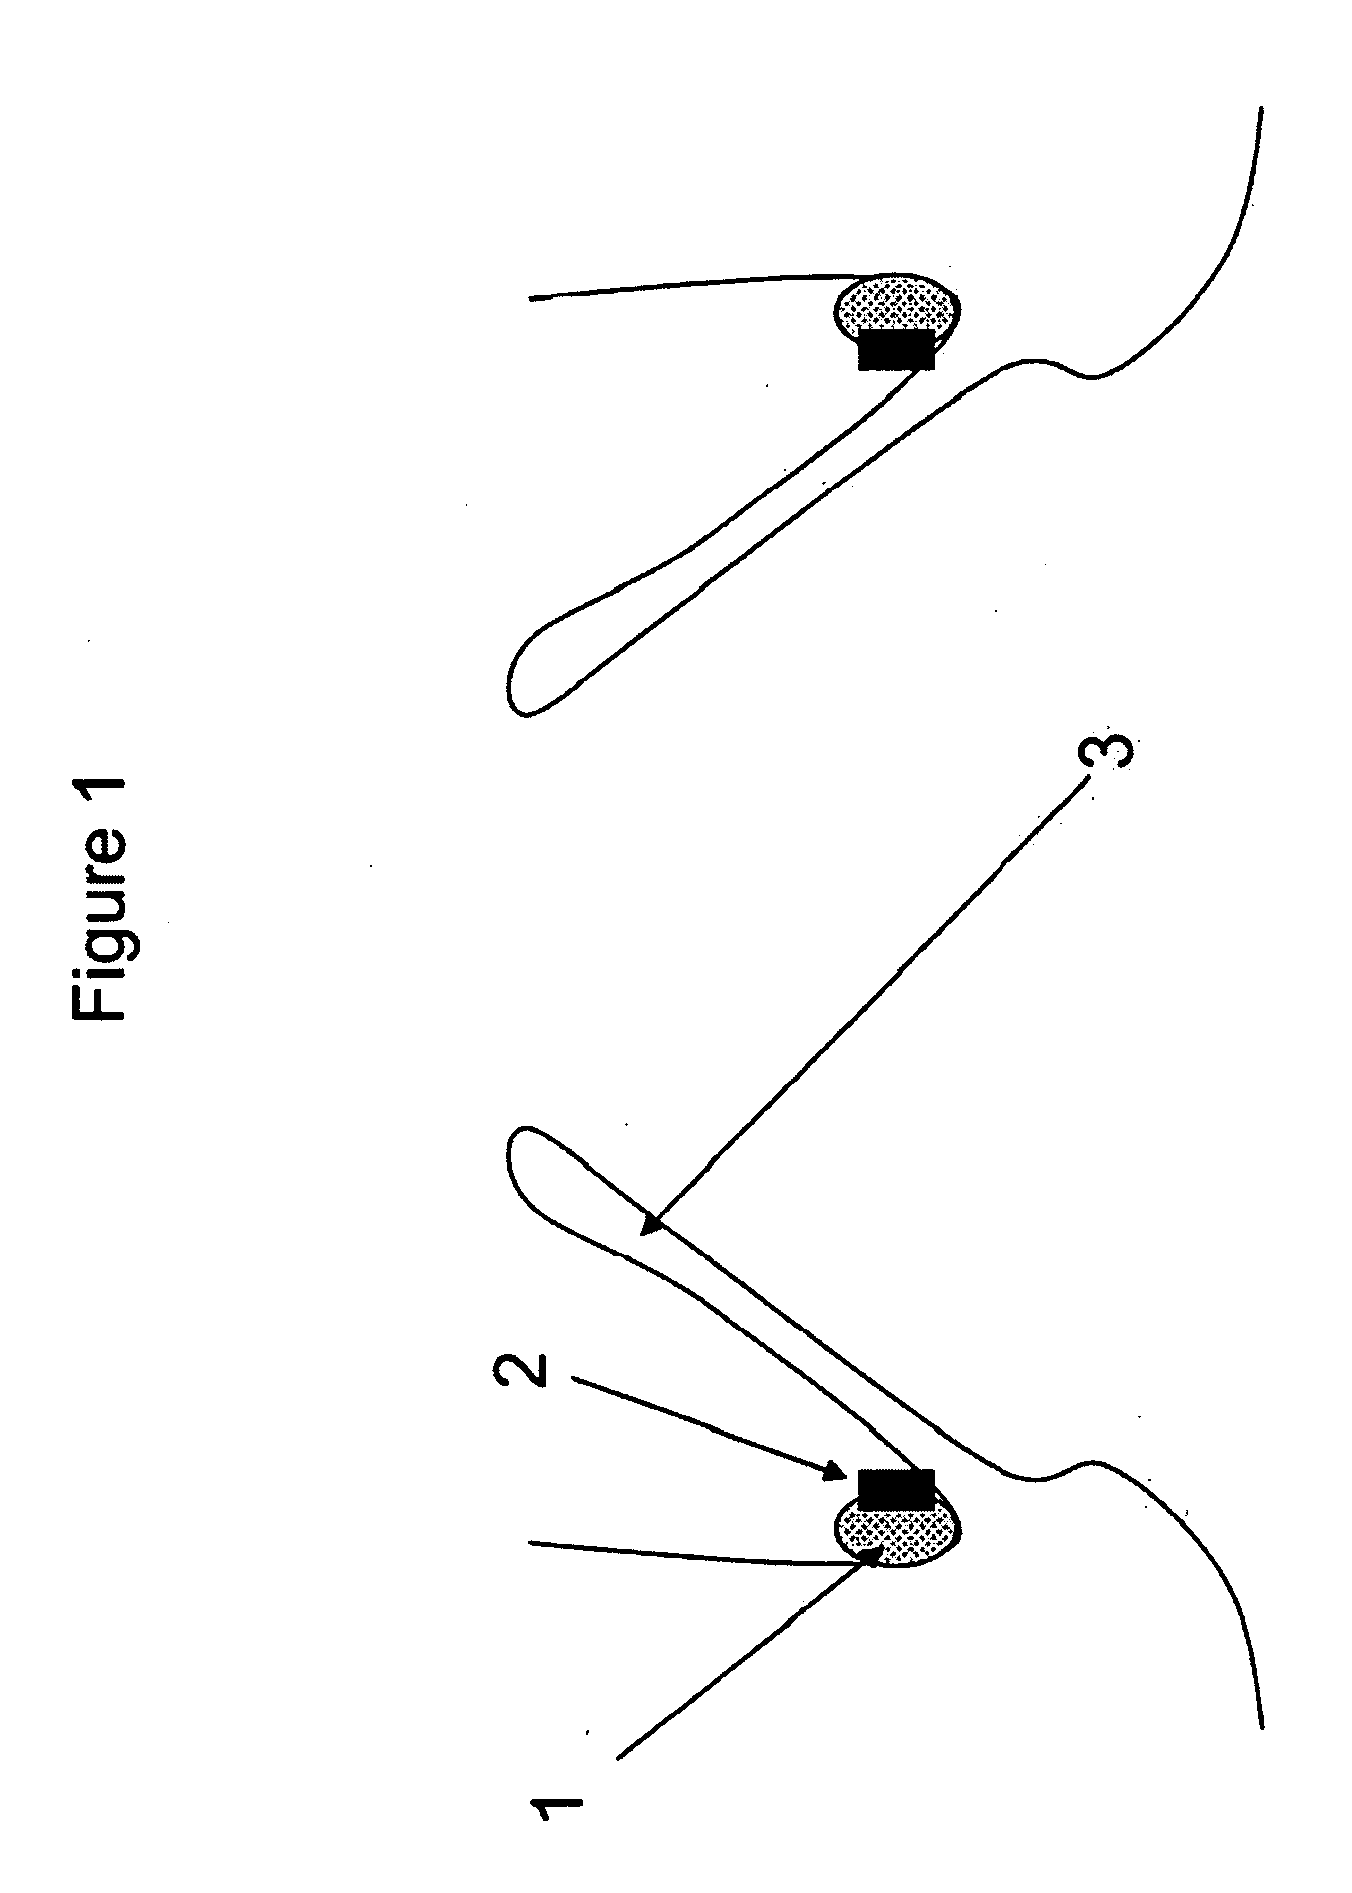 Method and apparatus for anchoring cardiovascular implants